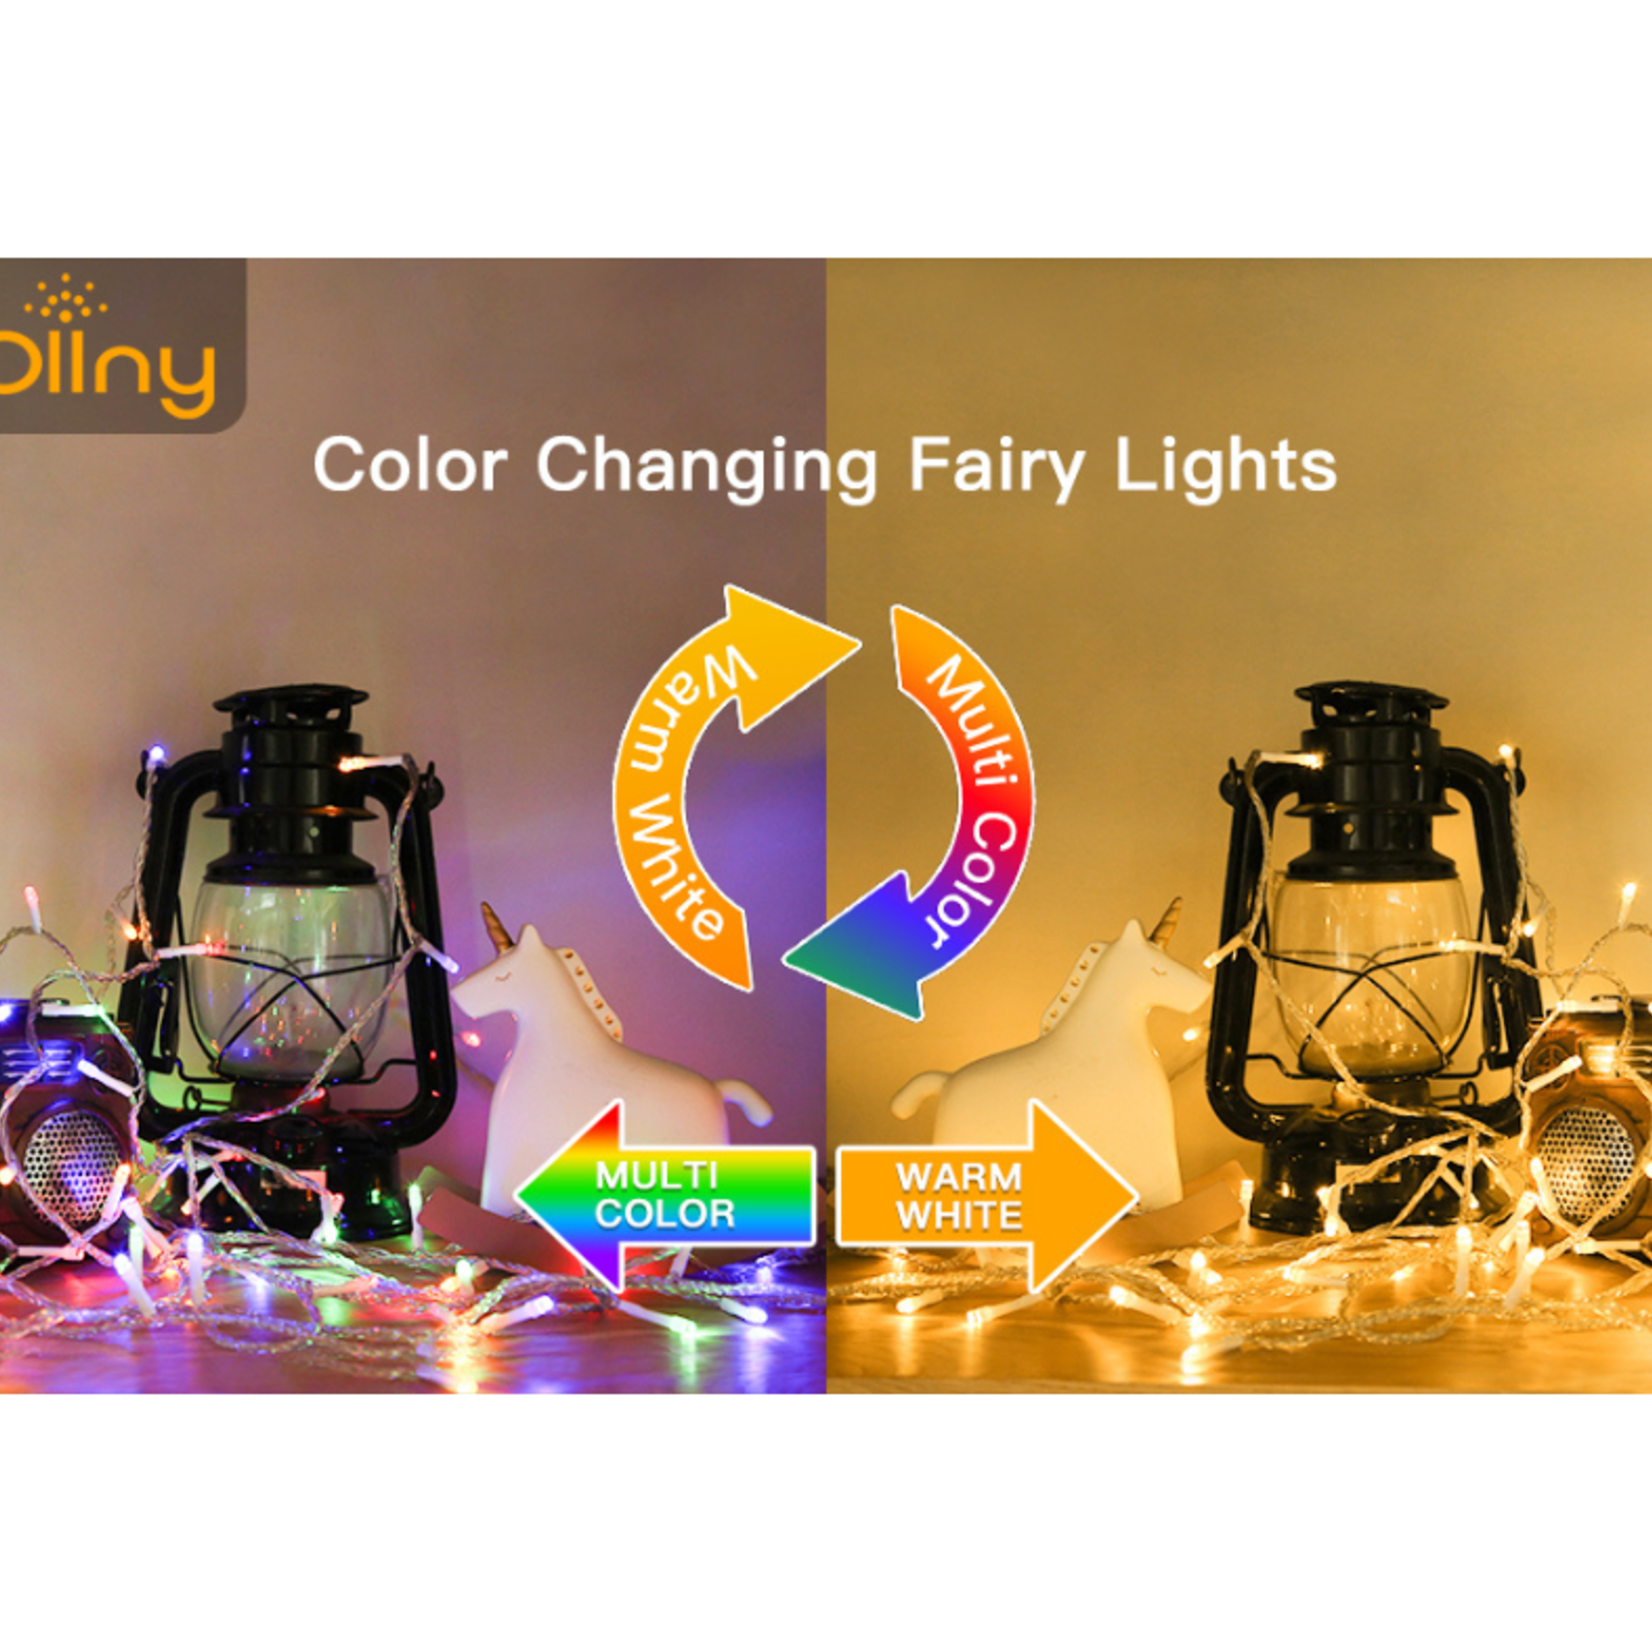 Ollny Fairy String Lights with Remote - 33FT